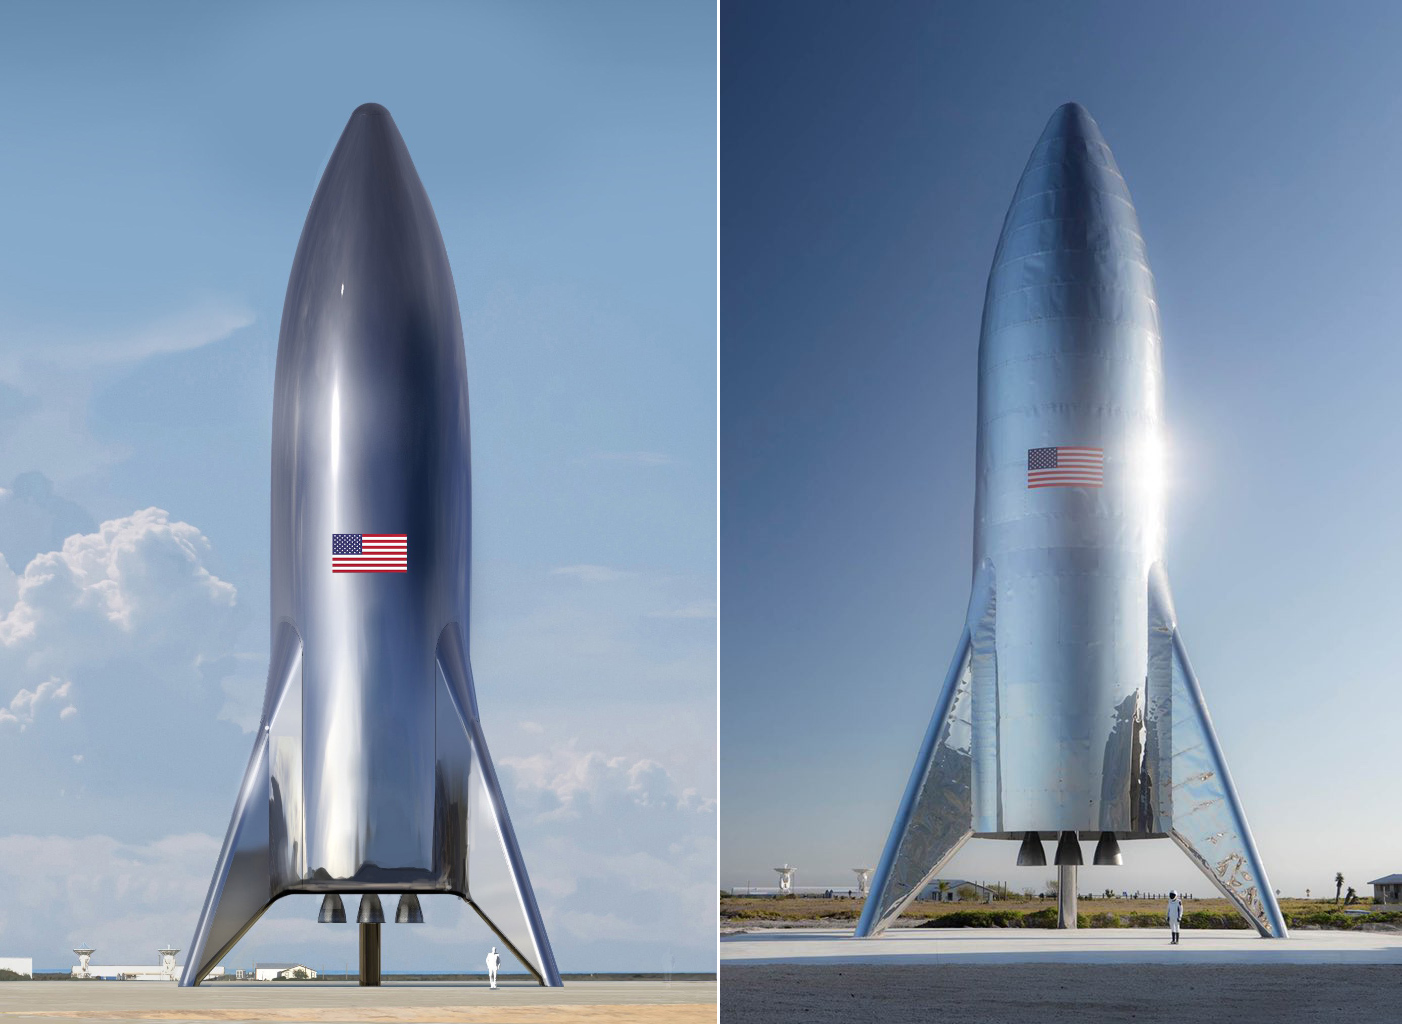 Rendering and photo of a stainless steel rocket